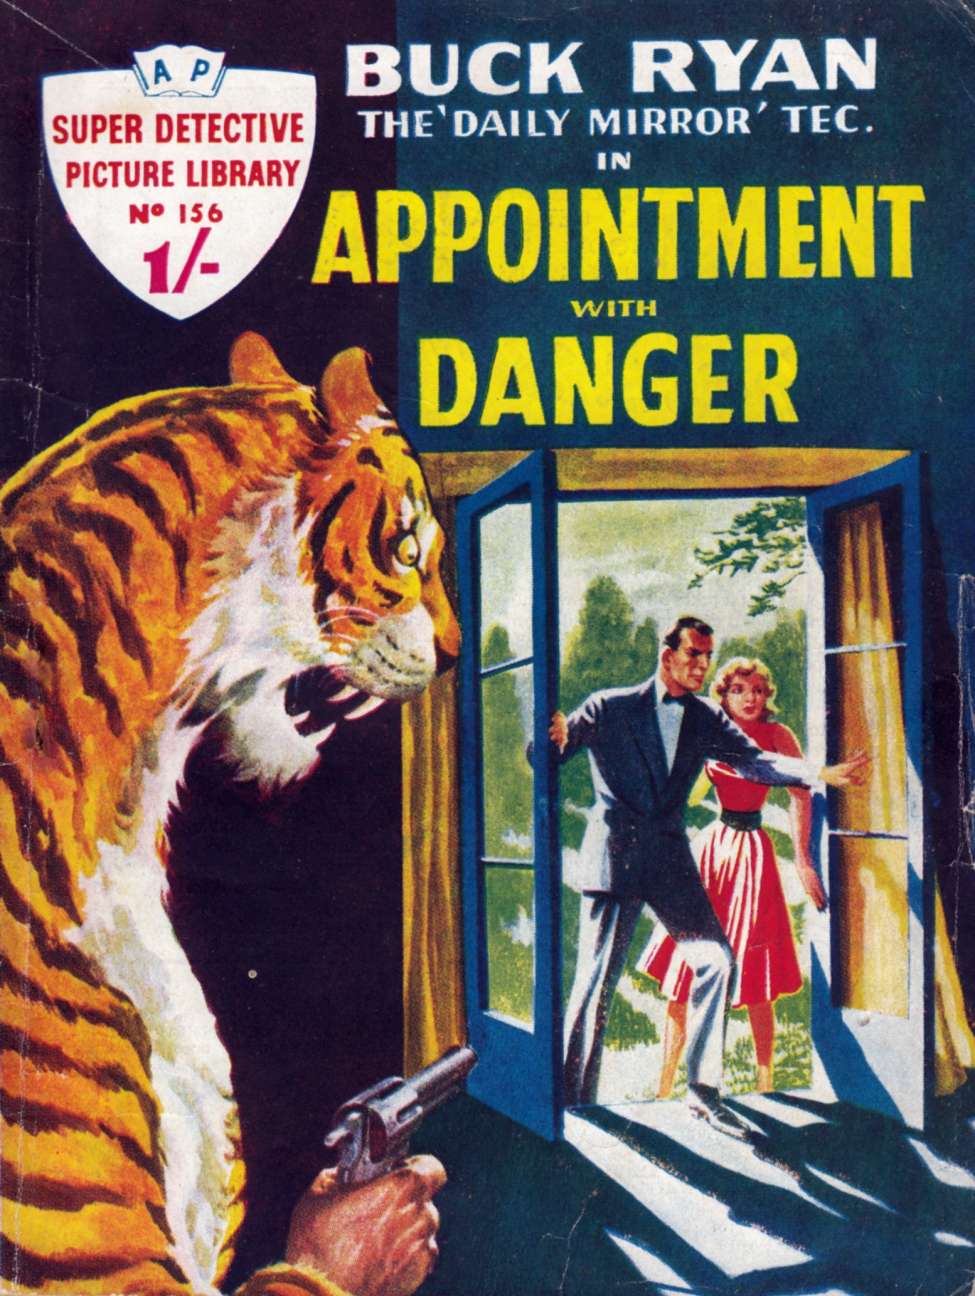 Book Cover For Super Detective Library 156 - Buck Ryan - Appointment With Danger